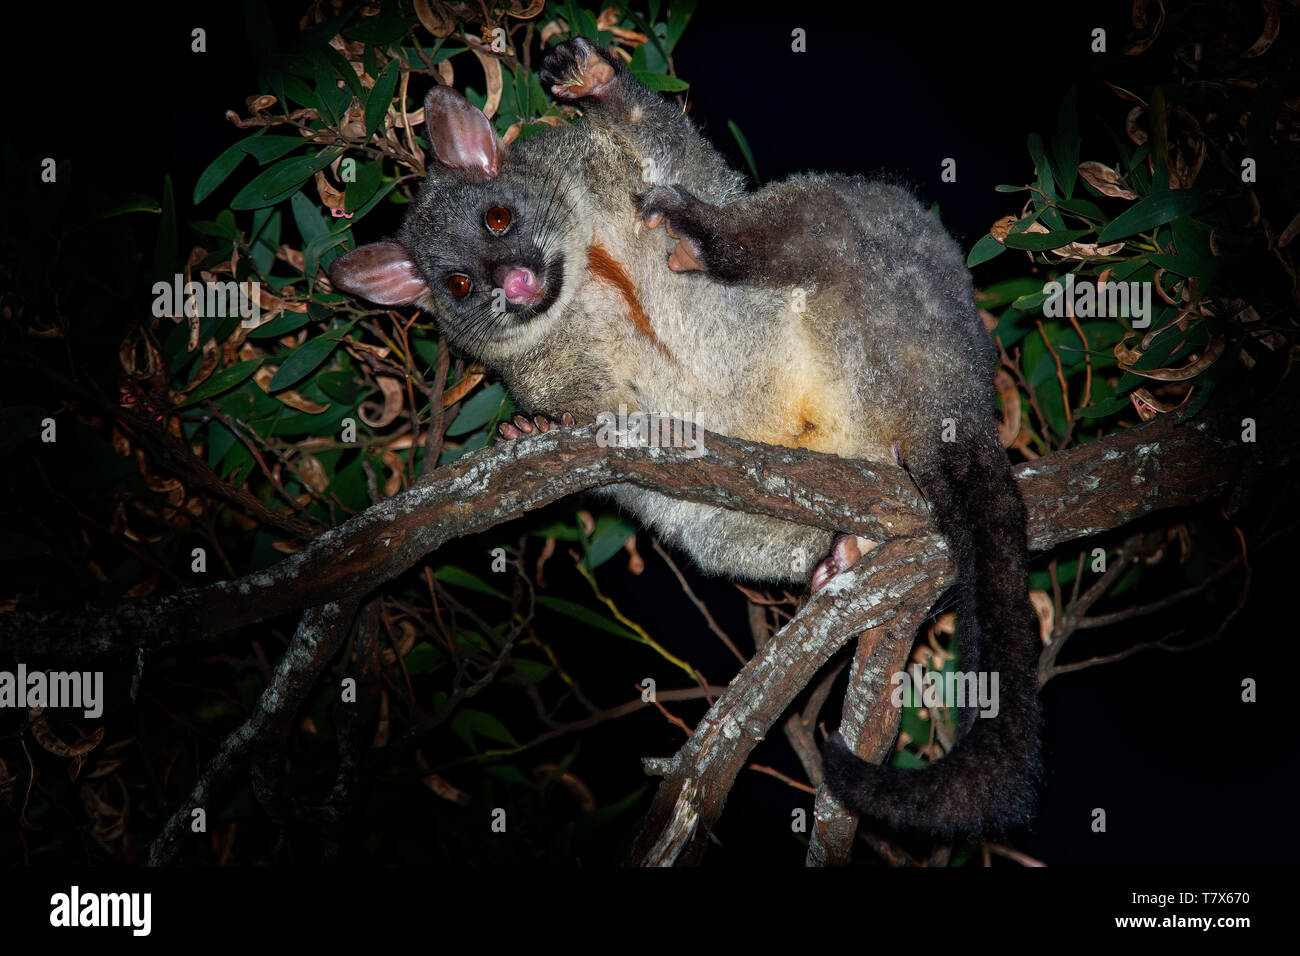 Common Brush-tailed Possum - Trichosurus vulpecula is nocturnal marsupial living in Australia and introducted to New Zealand, eating eucalyptus leafs  Stock Photo